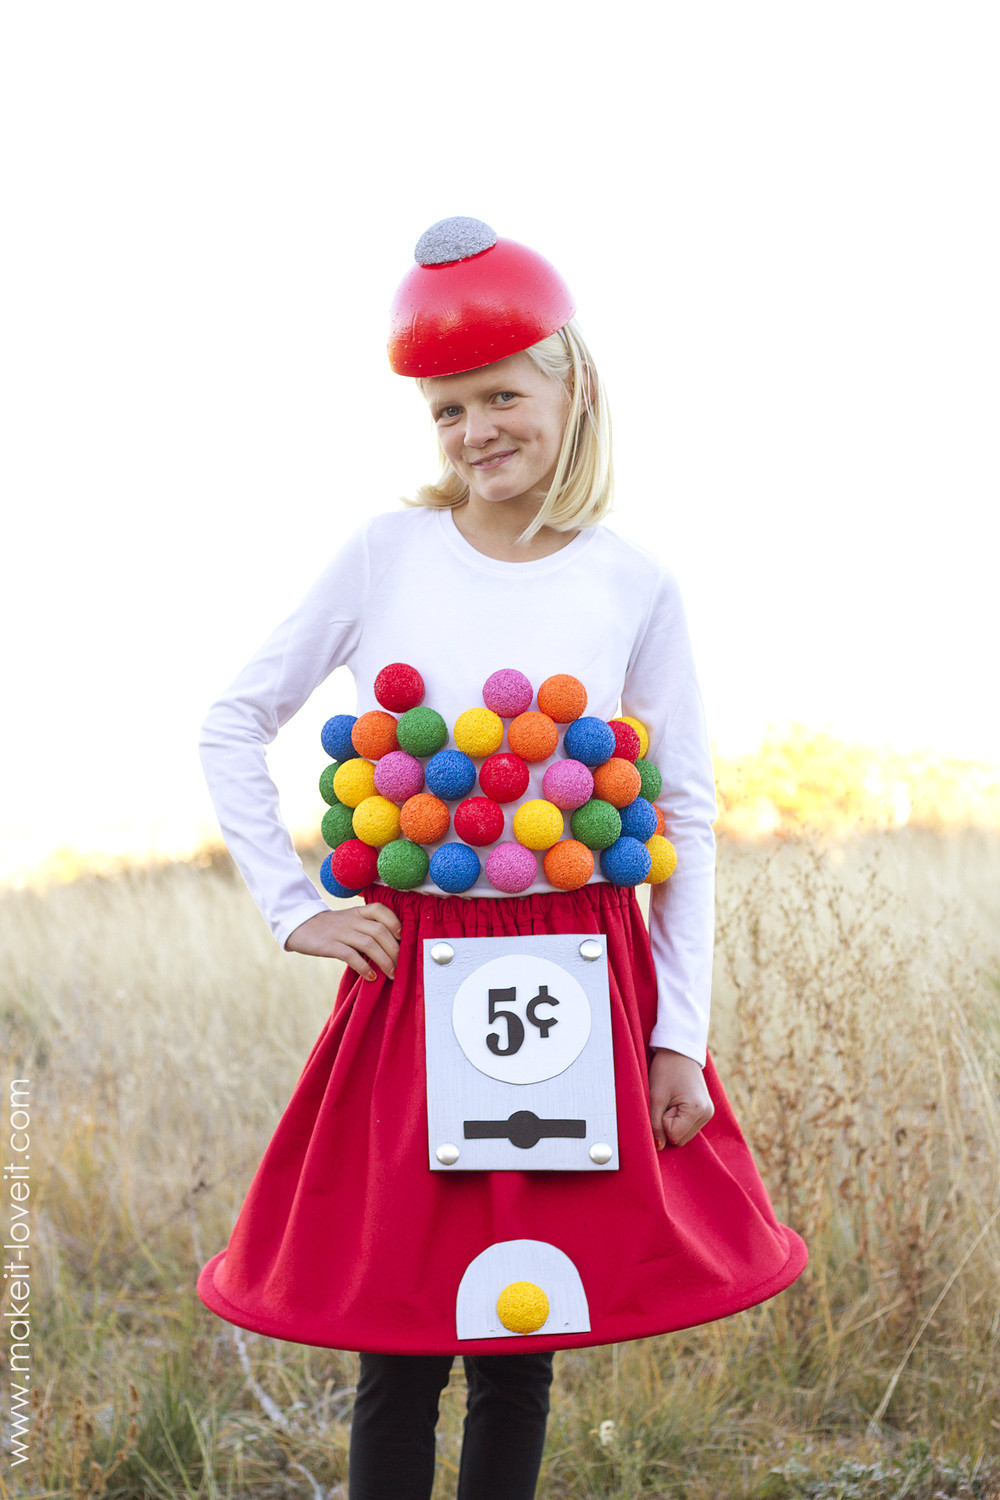 Gumball Machine Costume DIY
 Gumball Machine Costume a very Low Sew project